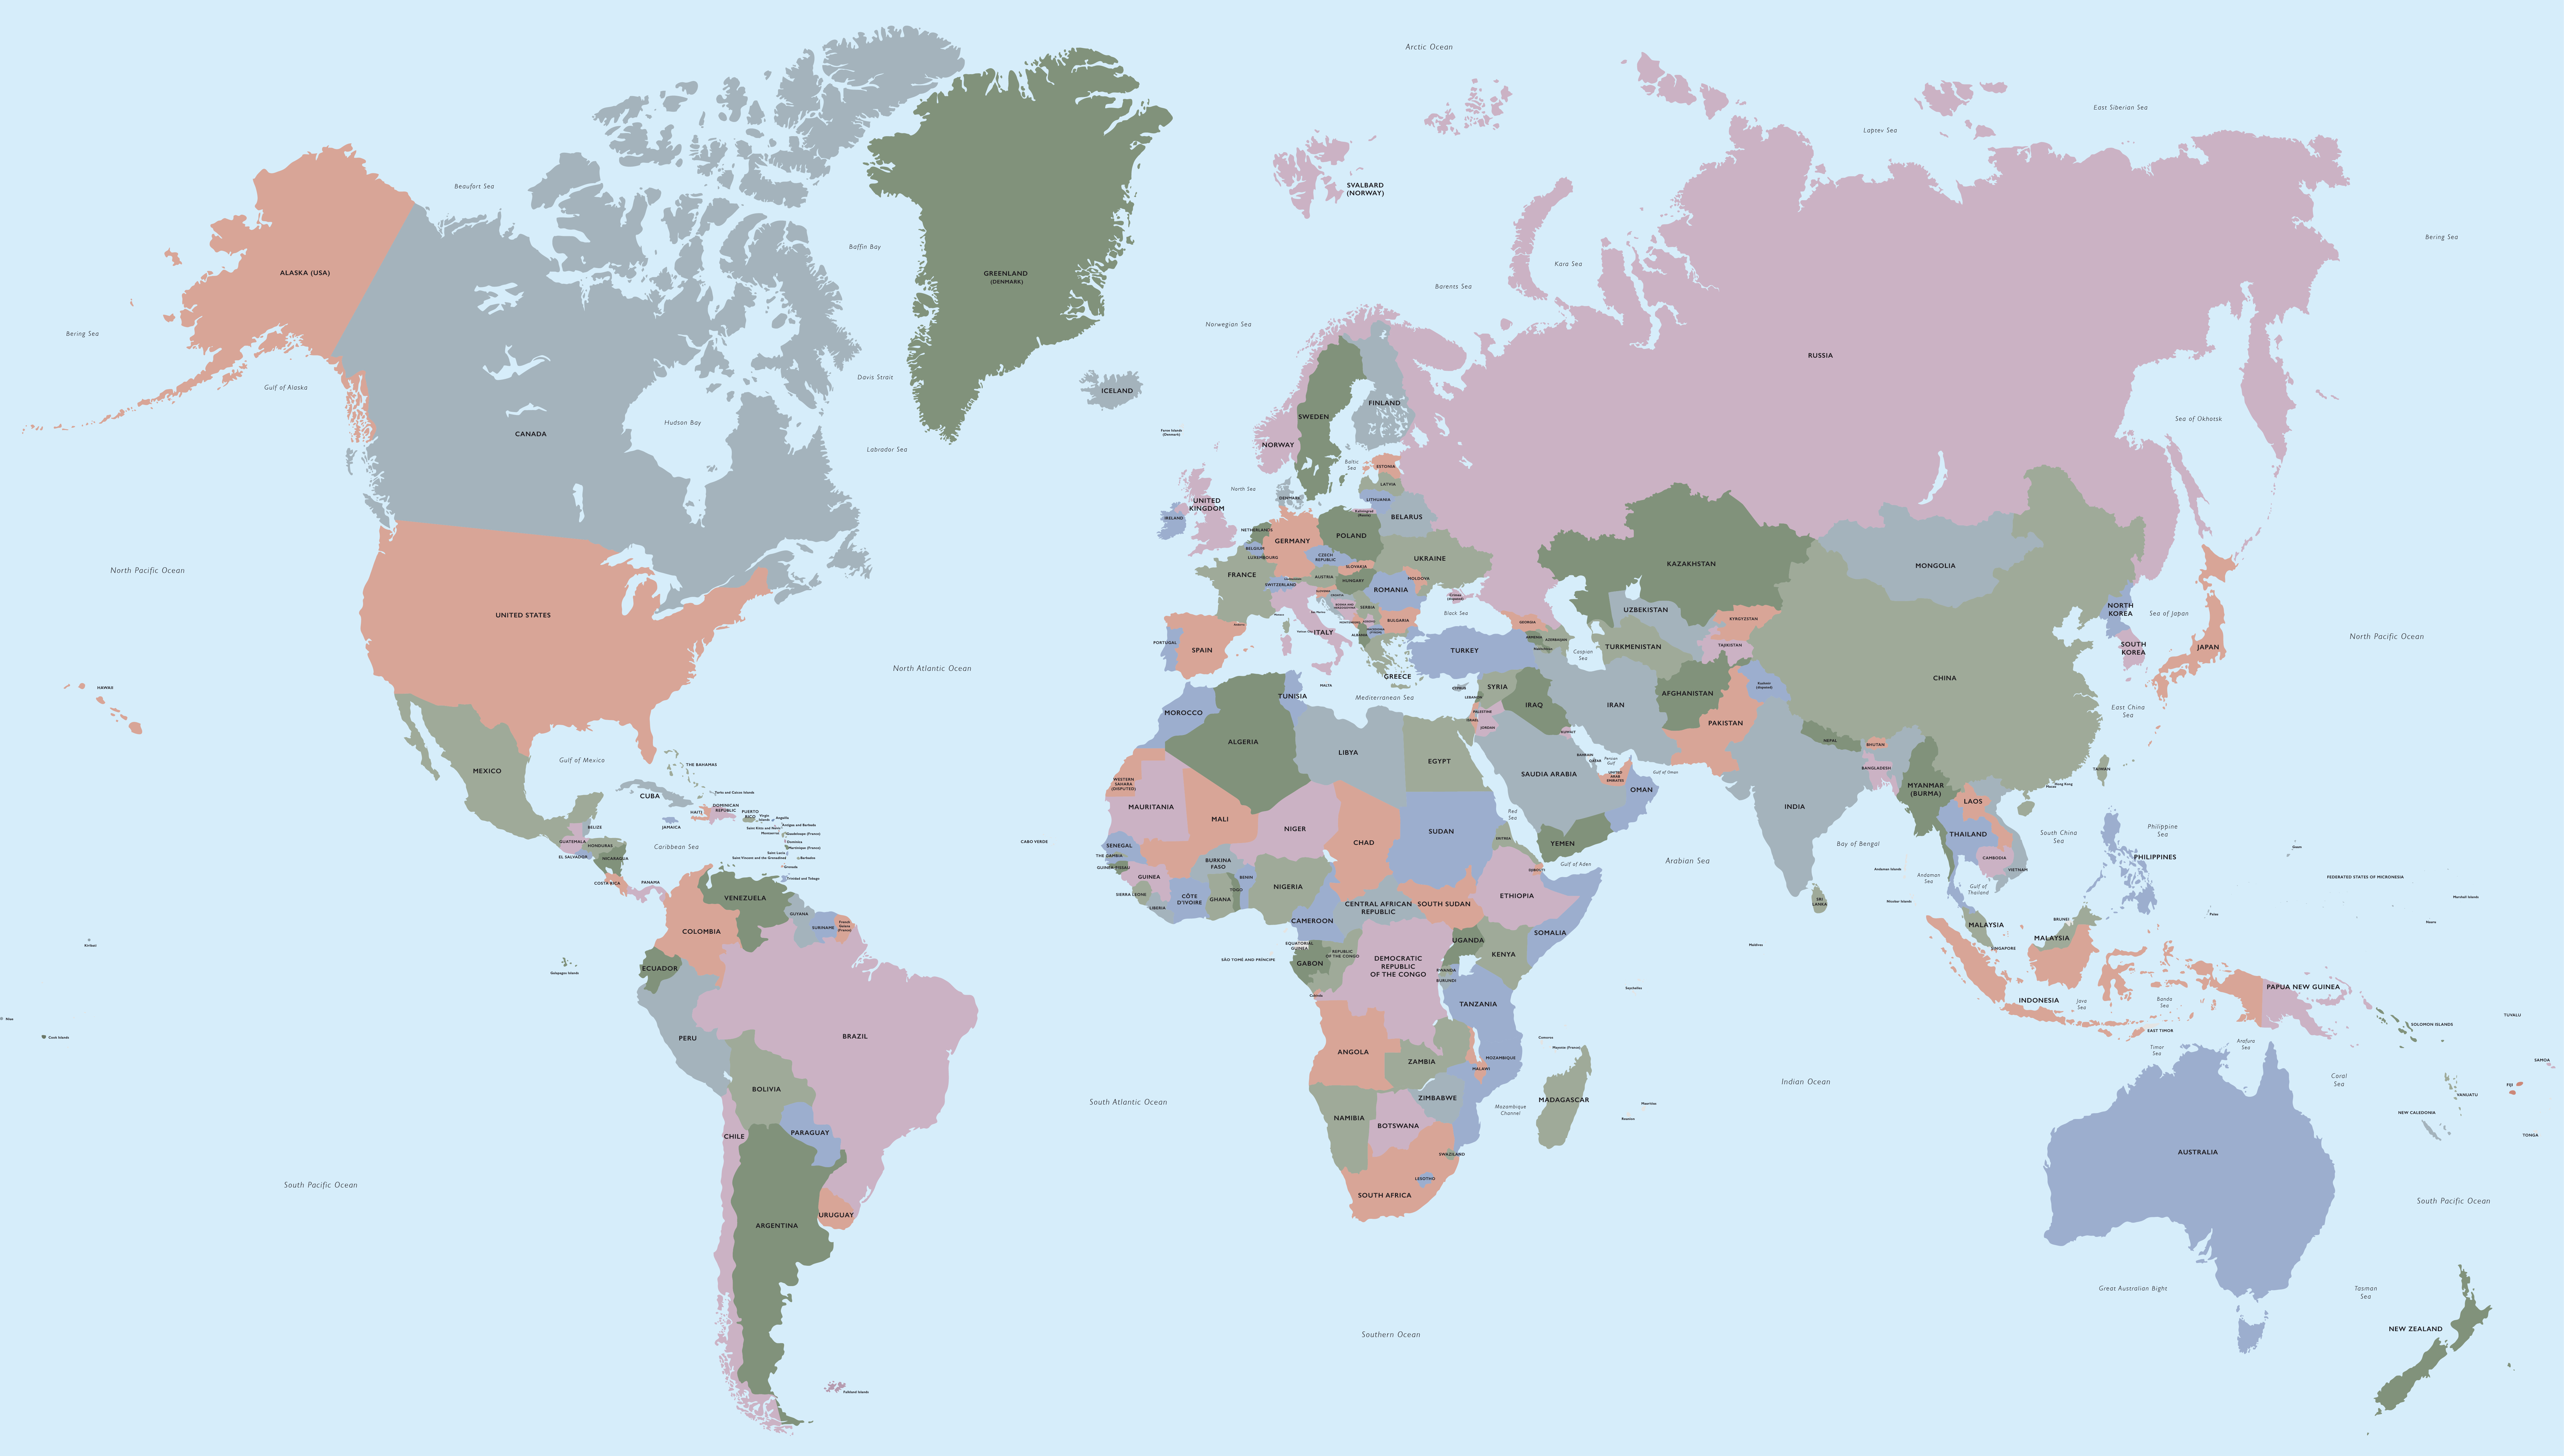 Download Vector World Map With All Countries - Maproom